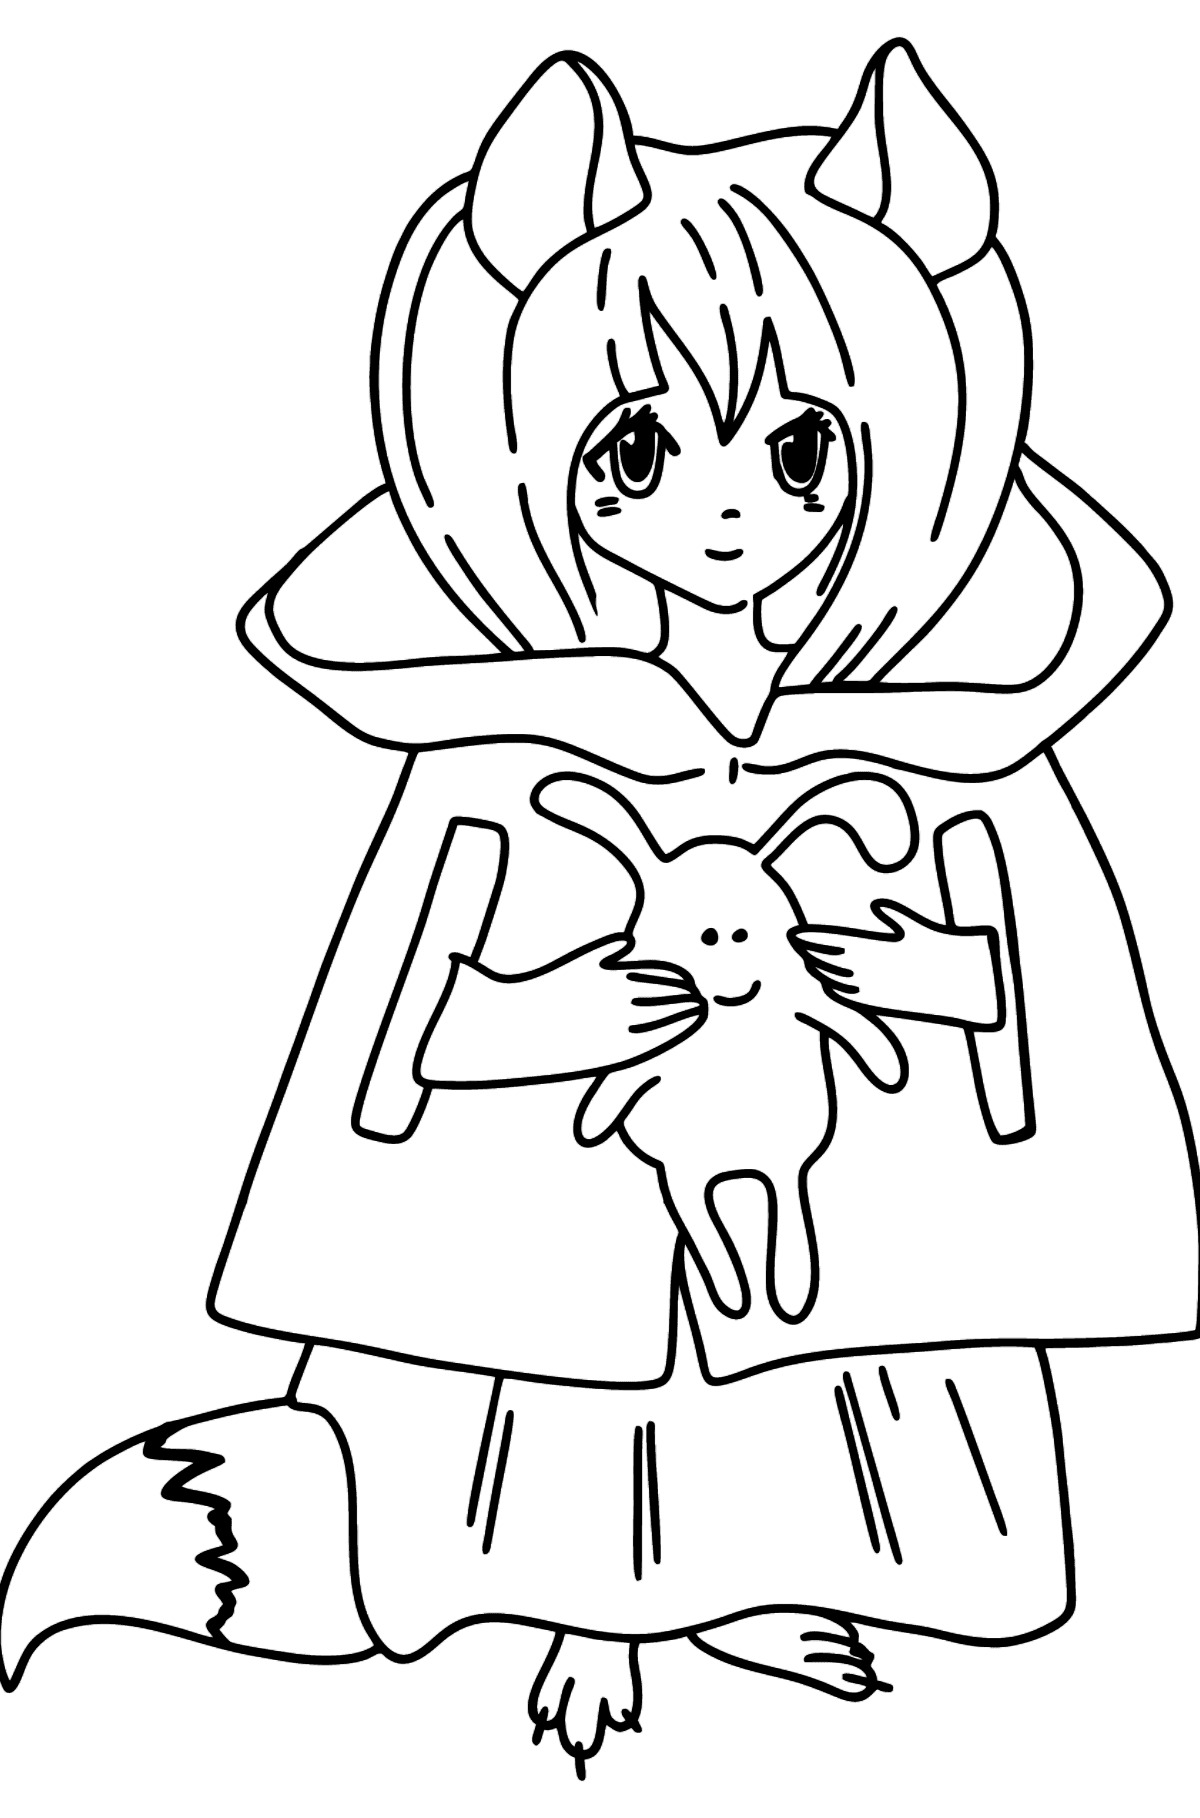 Anime Girl with Tail coloring page - Coloring Pages for Kids